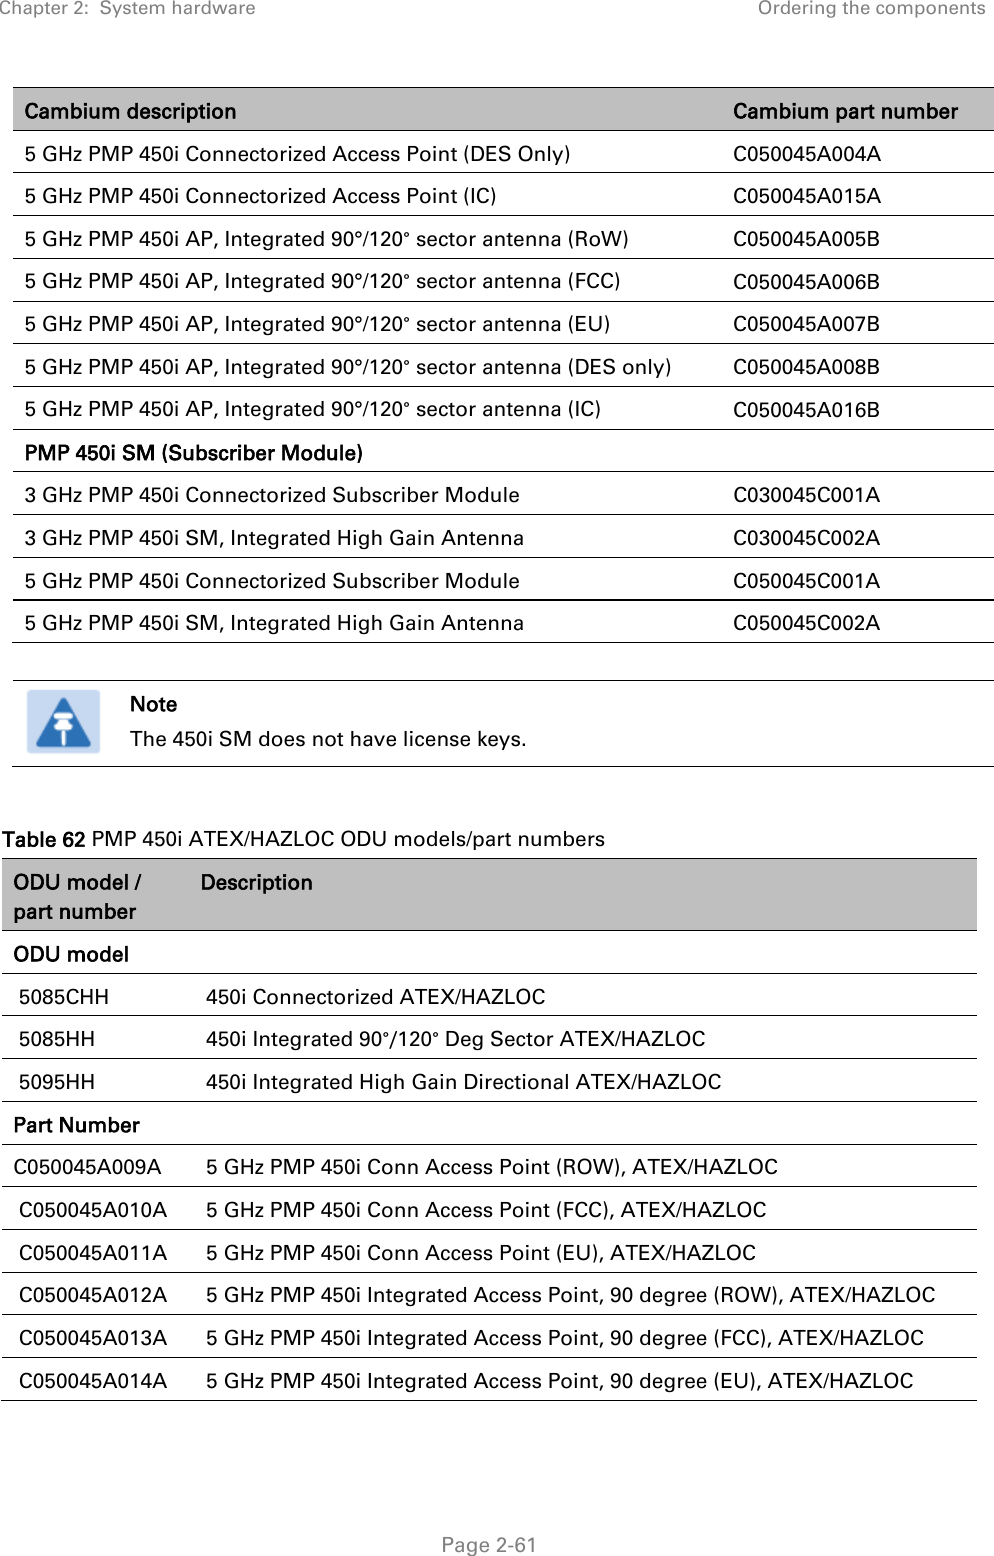 Chapter 2:  System hardware Ordering the components   Page 2-61 Cambium description Cambium part number 5 GHz PMP 450i Connectorized Access Point (DES Only)  C050045A004A 5 GHz PMP 450i Connectorized Access Point (IC) C050045A015A 5 GHz PMP 450i AP, Integrated 90°/120° sector antenna (RoW) C050045A005B 5 GHz PMP 450i AP, Integrated 90°/120° sector antenna (FCC) C050045A006B 5 GHz PMP 450i AP, Integrated 90°/120° sector antenna (EU) C050045A007B 5 GHz PMP 450i AP, Integrated 90°/120° sector antenna (DES only)  C050045A008B 5 GHz PMP 450i AP, Integrated 90°/120° sector antenna (IC) C050045A016B PMP 450i SM (Subscriber Module)  3 GHz PMP 450i Connectorized Subscriber Module C030045C001A 3 GHz PMP 450i SM, Integrated High Gain Antenna C030045C002A 5 GHz PMP 450i Connectorized Subscriber Module C050045C001A 5 GHz PMP 450i SM, Integrated High Gain Antenna C050045C002A   Note The 450i SM does not have license keys.  Table 62 PMP 450i ATEX/HAZLOC ODU models/part numbers ODU model / part number Description ODU model   5085CHH    450i Connectorized ATEX/HAZLOC   5085HH   450i Integrated 90°/120° Deg Sector ATEX/HAZLOC   5095HH    450i Integrated High Gain Directional ATEX/HAZLOC  Part Number  C050045A009A    5 GHz PMP 450i Conn Access Point (ROW), ATEX/HAZLOC   C050045A010A    5 GHz PMP 450i Conn Access Point (FCC), ATEX/HAZLOC   C050045A011A    5 GHz PMP 450i Conn Access Point (EU), ATEX/HAZLOC   C050045A012A    5 GHz PMP 450i Integrated Access Point, 90 degree (ROW), ATEX/HAZLOC   C050045A013A    5 GHz PMP 450i Integrated Access Point, 90 degree (FCC), ATEX/HAZLOC   C050045A014A    5 GHz PMP 450i Integrated Access Point, 90 degree (EU), ATEX/HAZLOC  